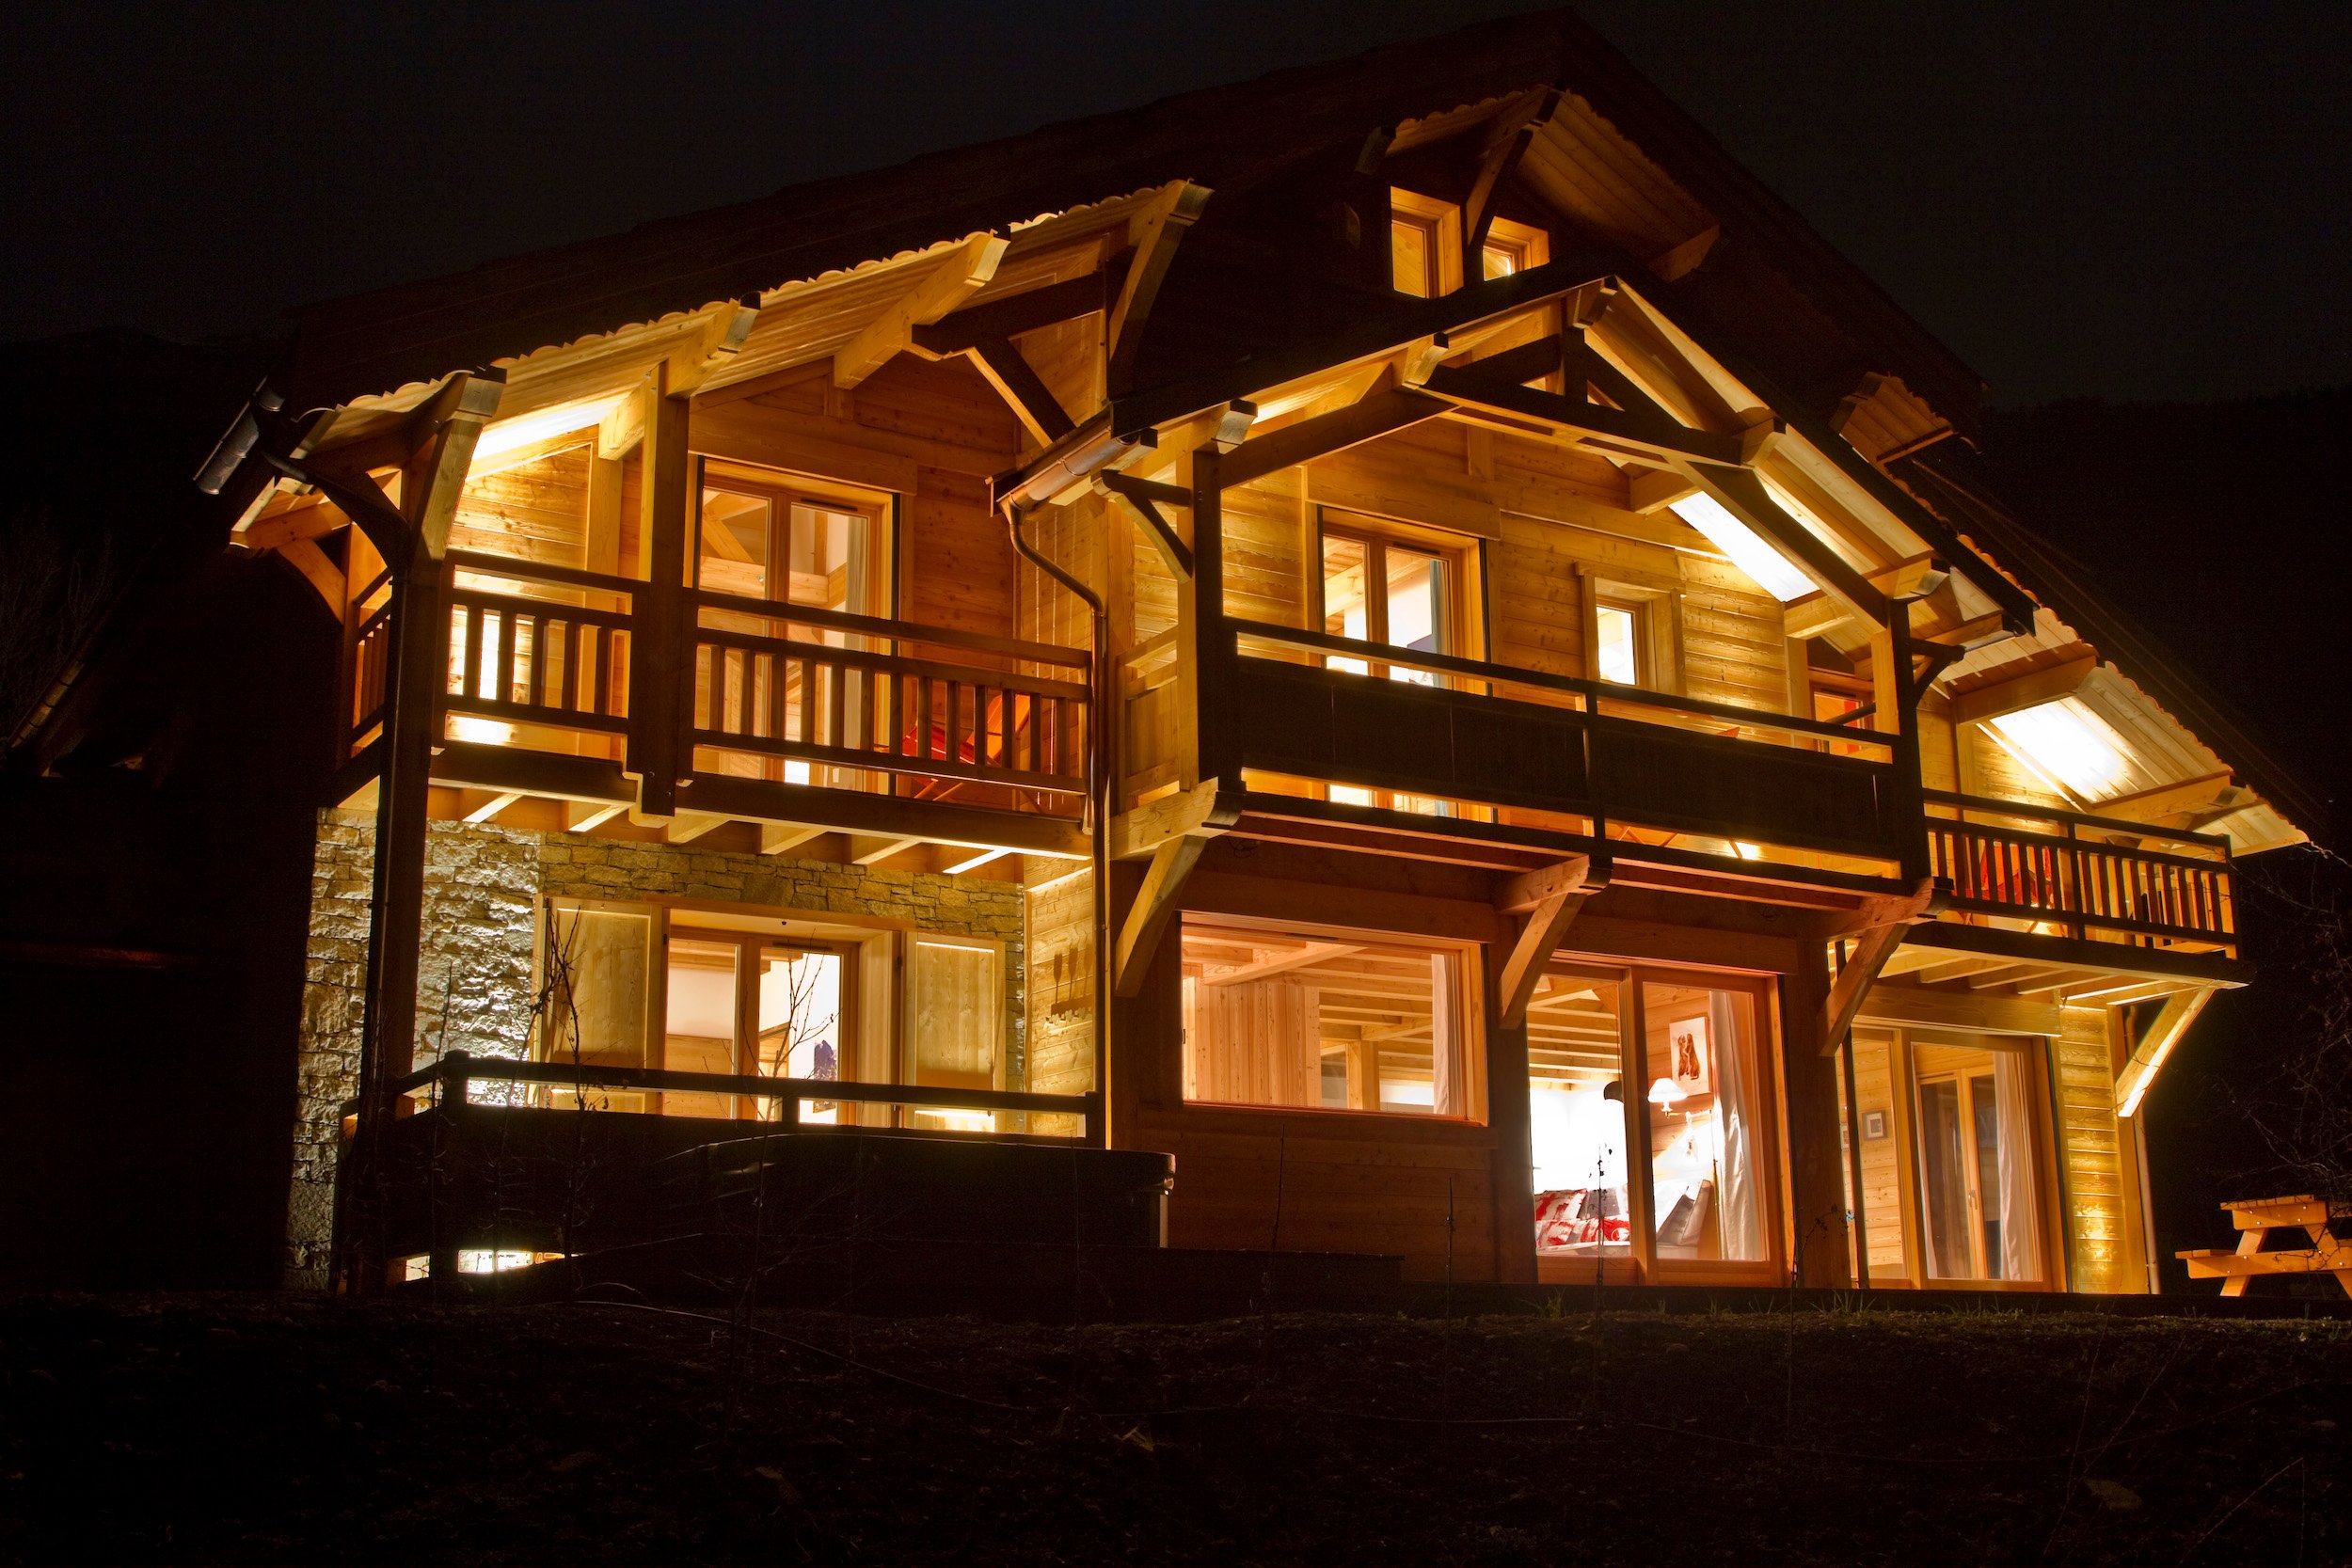 15/Chalet Ancolie/chalet-ancolie-lombard.jpg